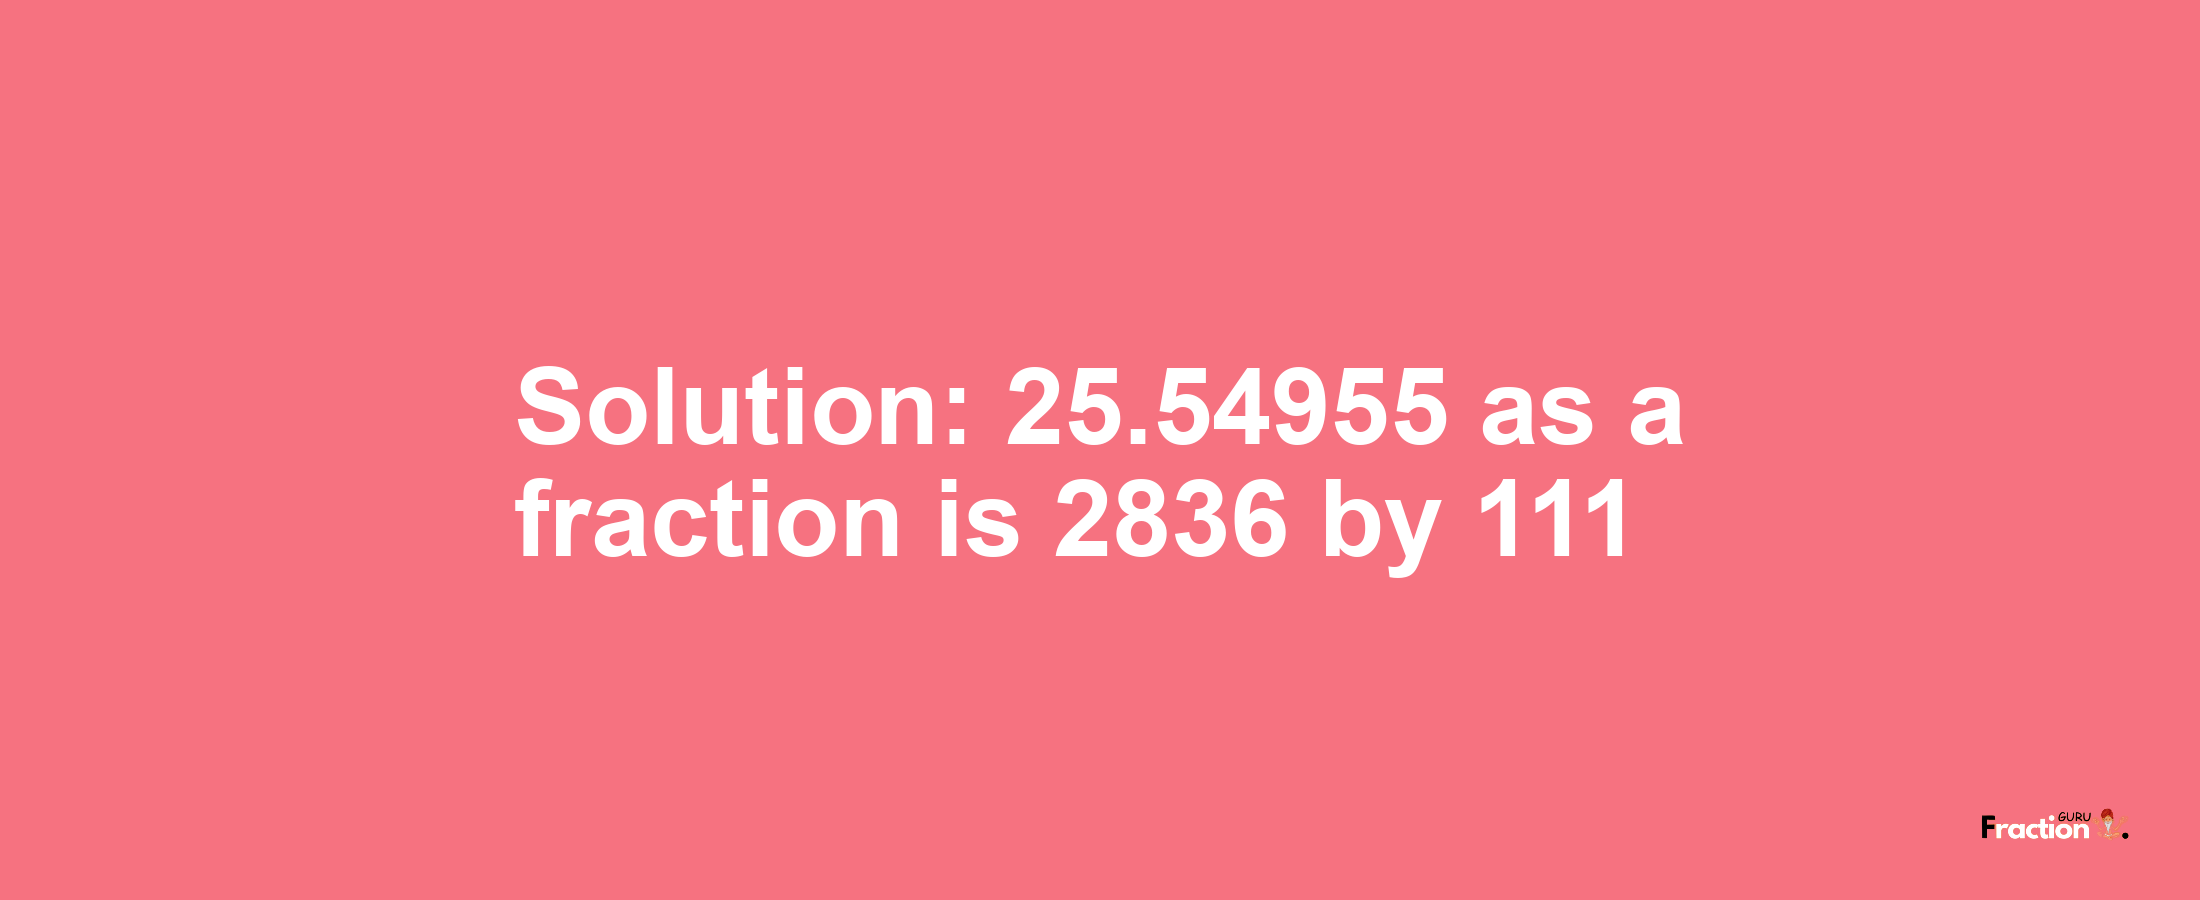 Solution:25.54955 as a fraction is 2836/111